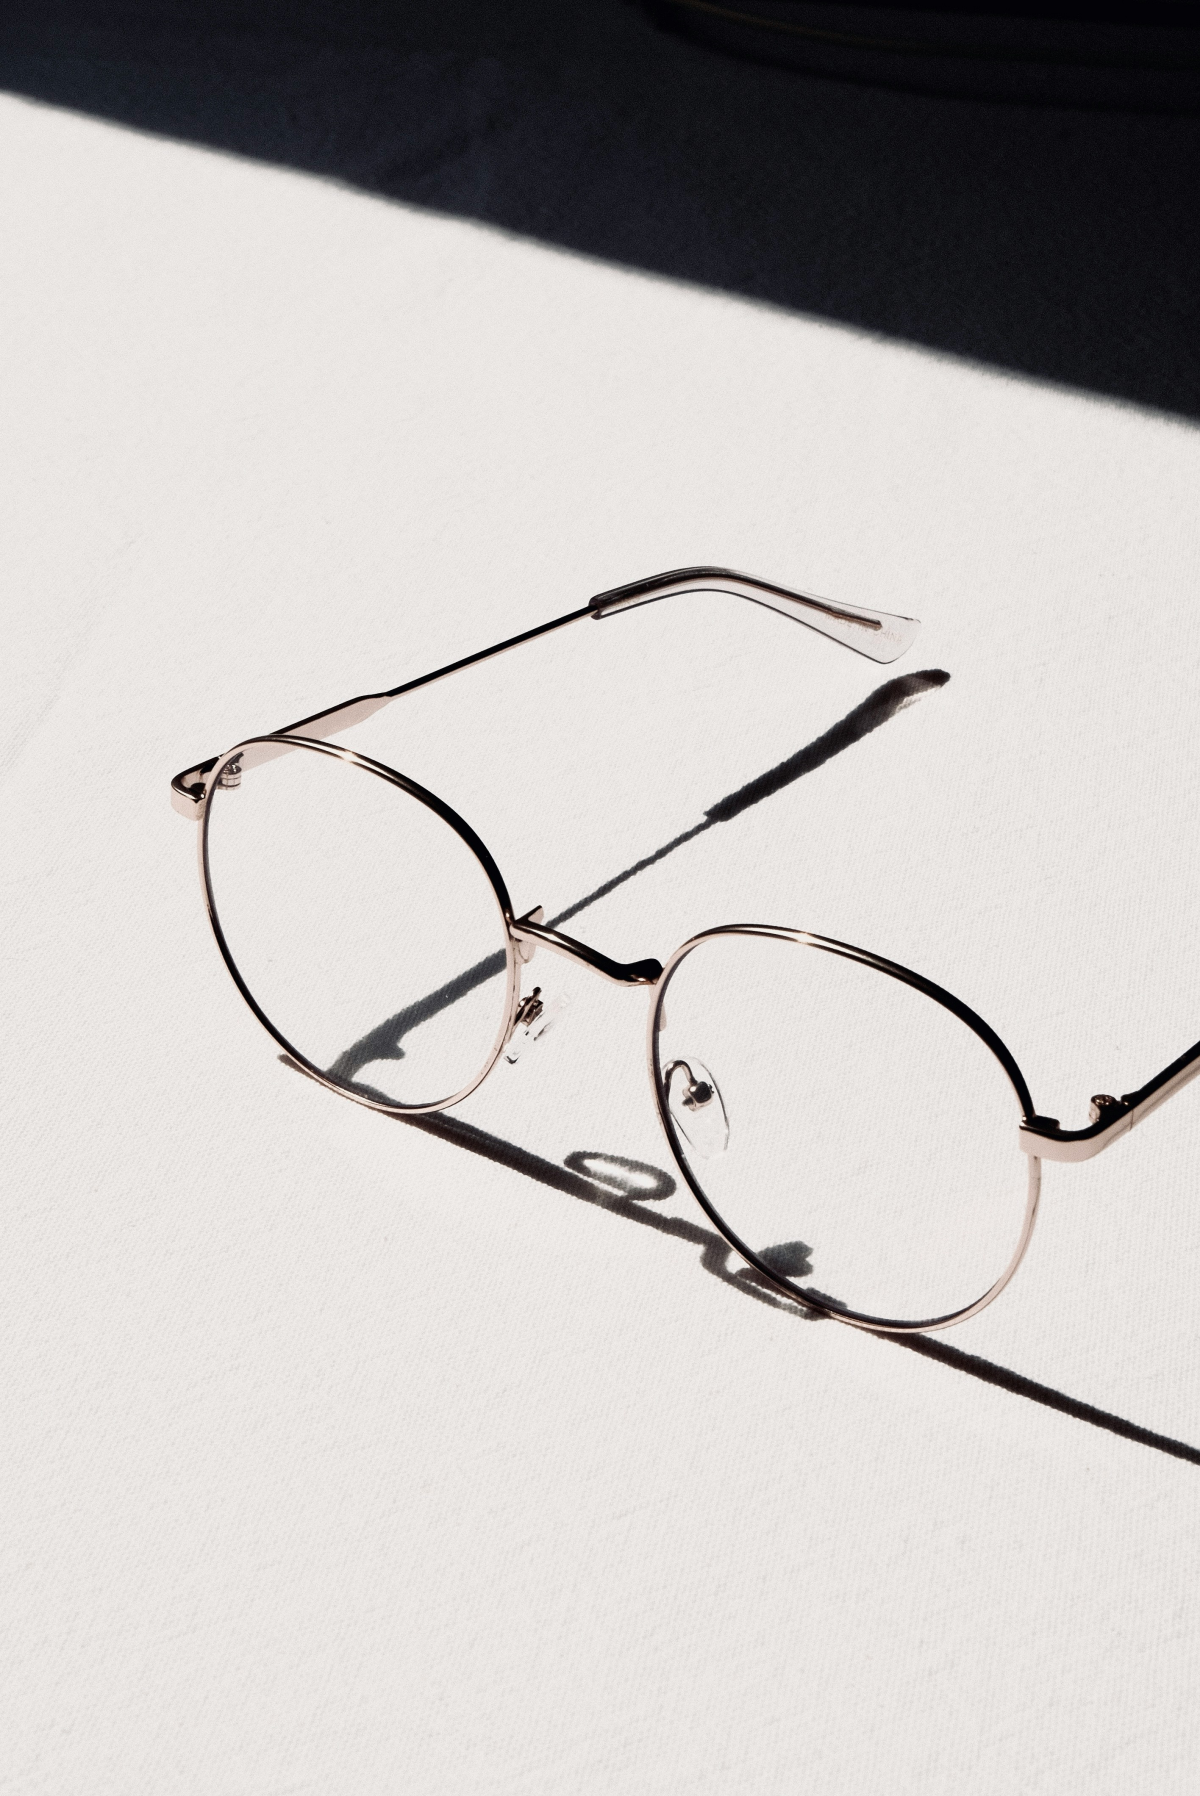 glasses with thin frames